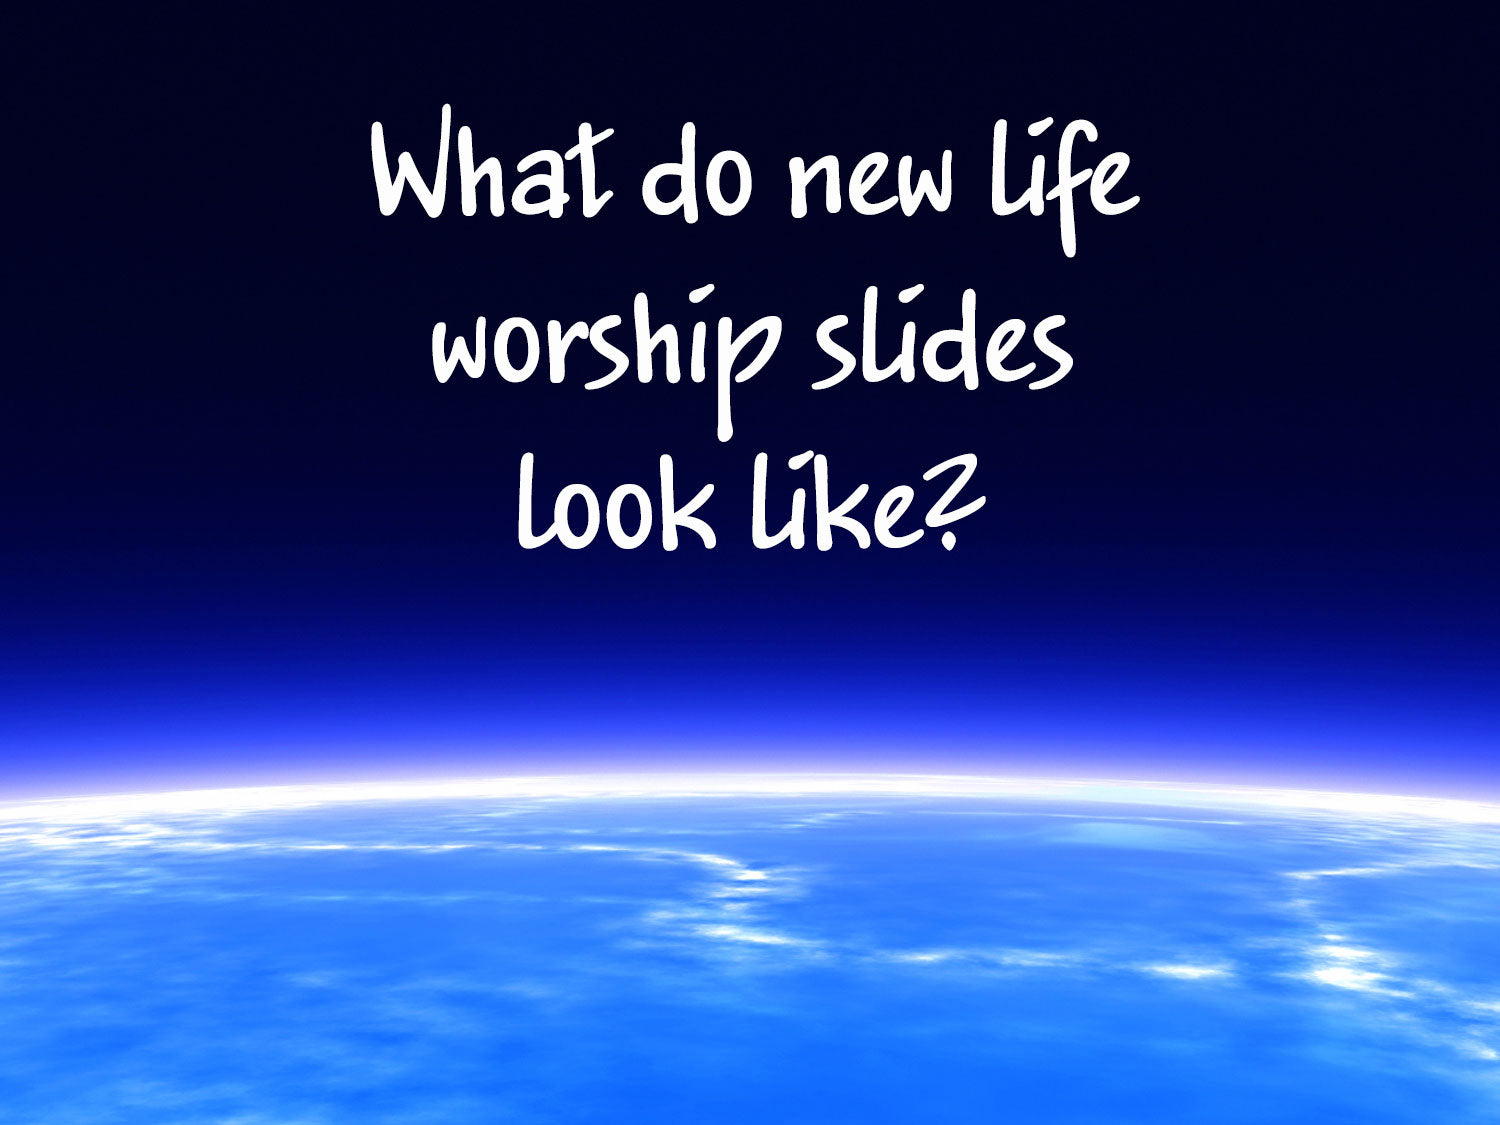 What do new life worship slides look like?